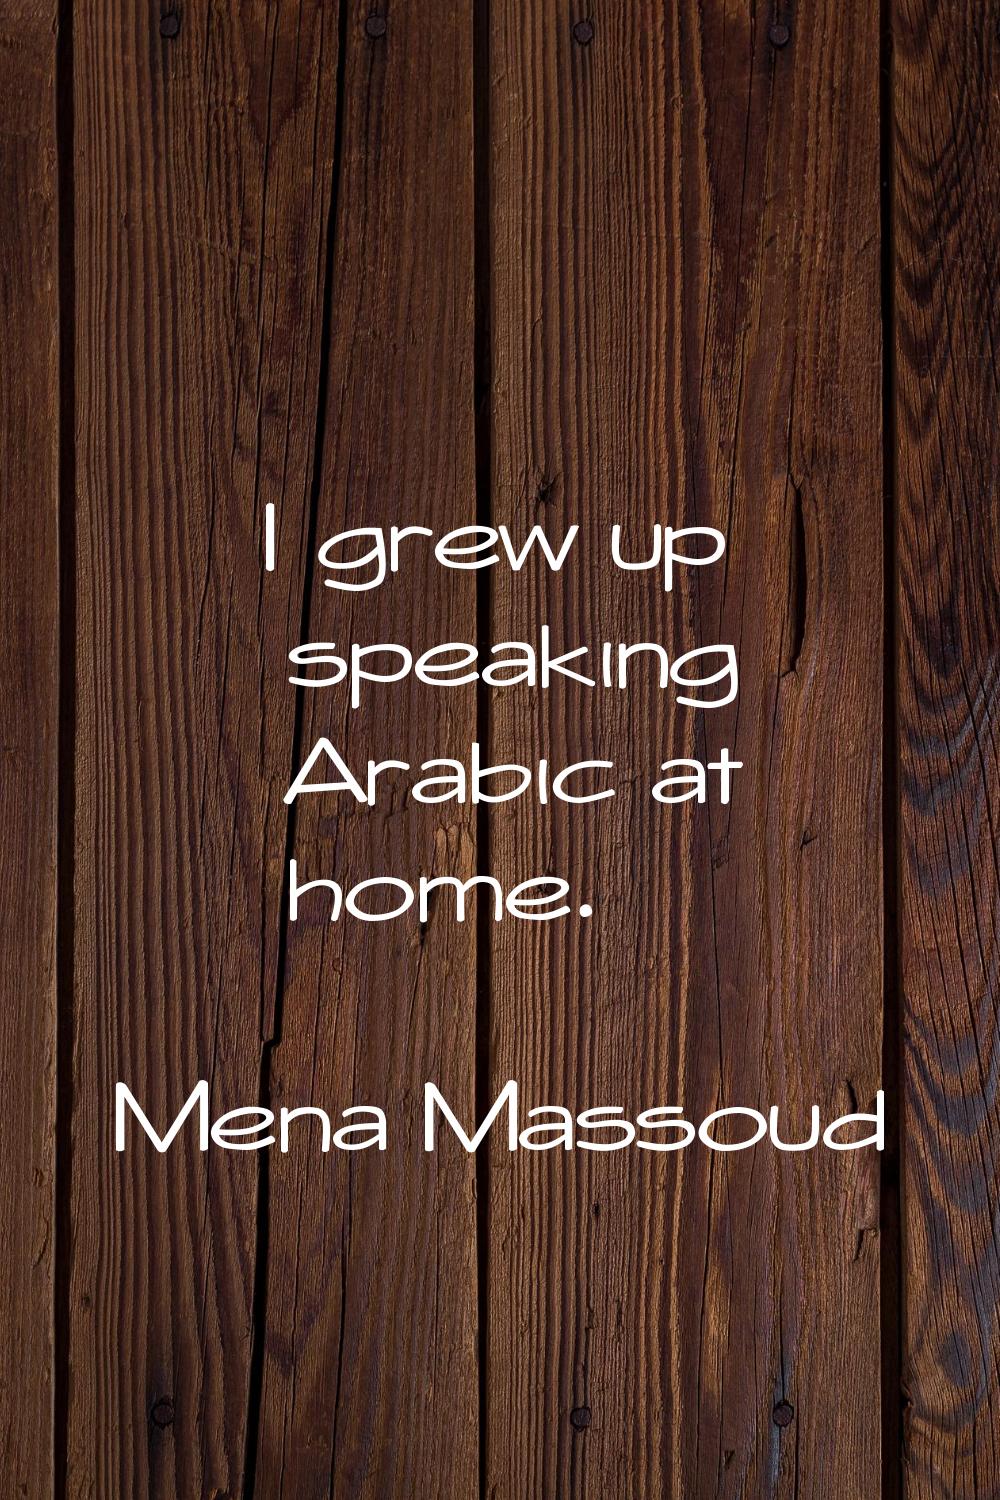 I grew up speaking Arabic at home.